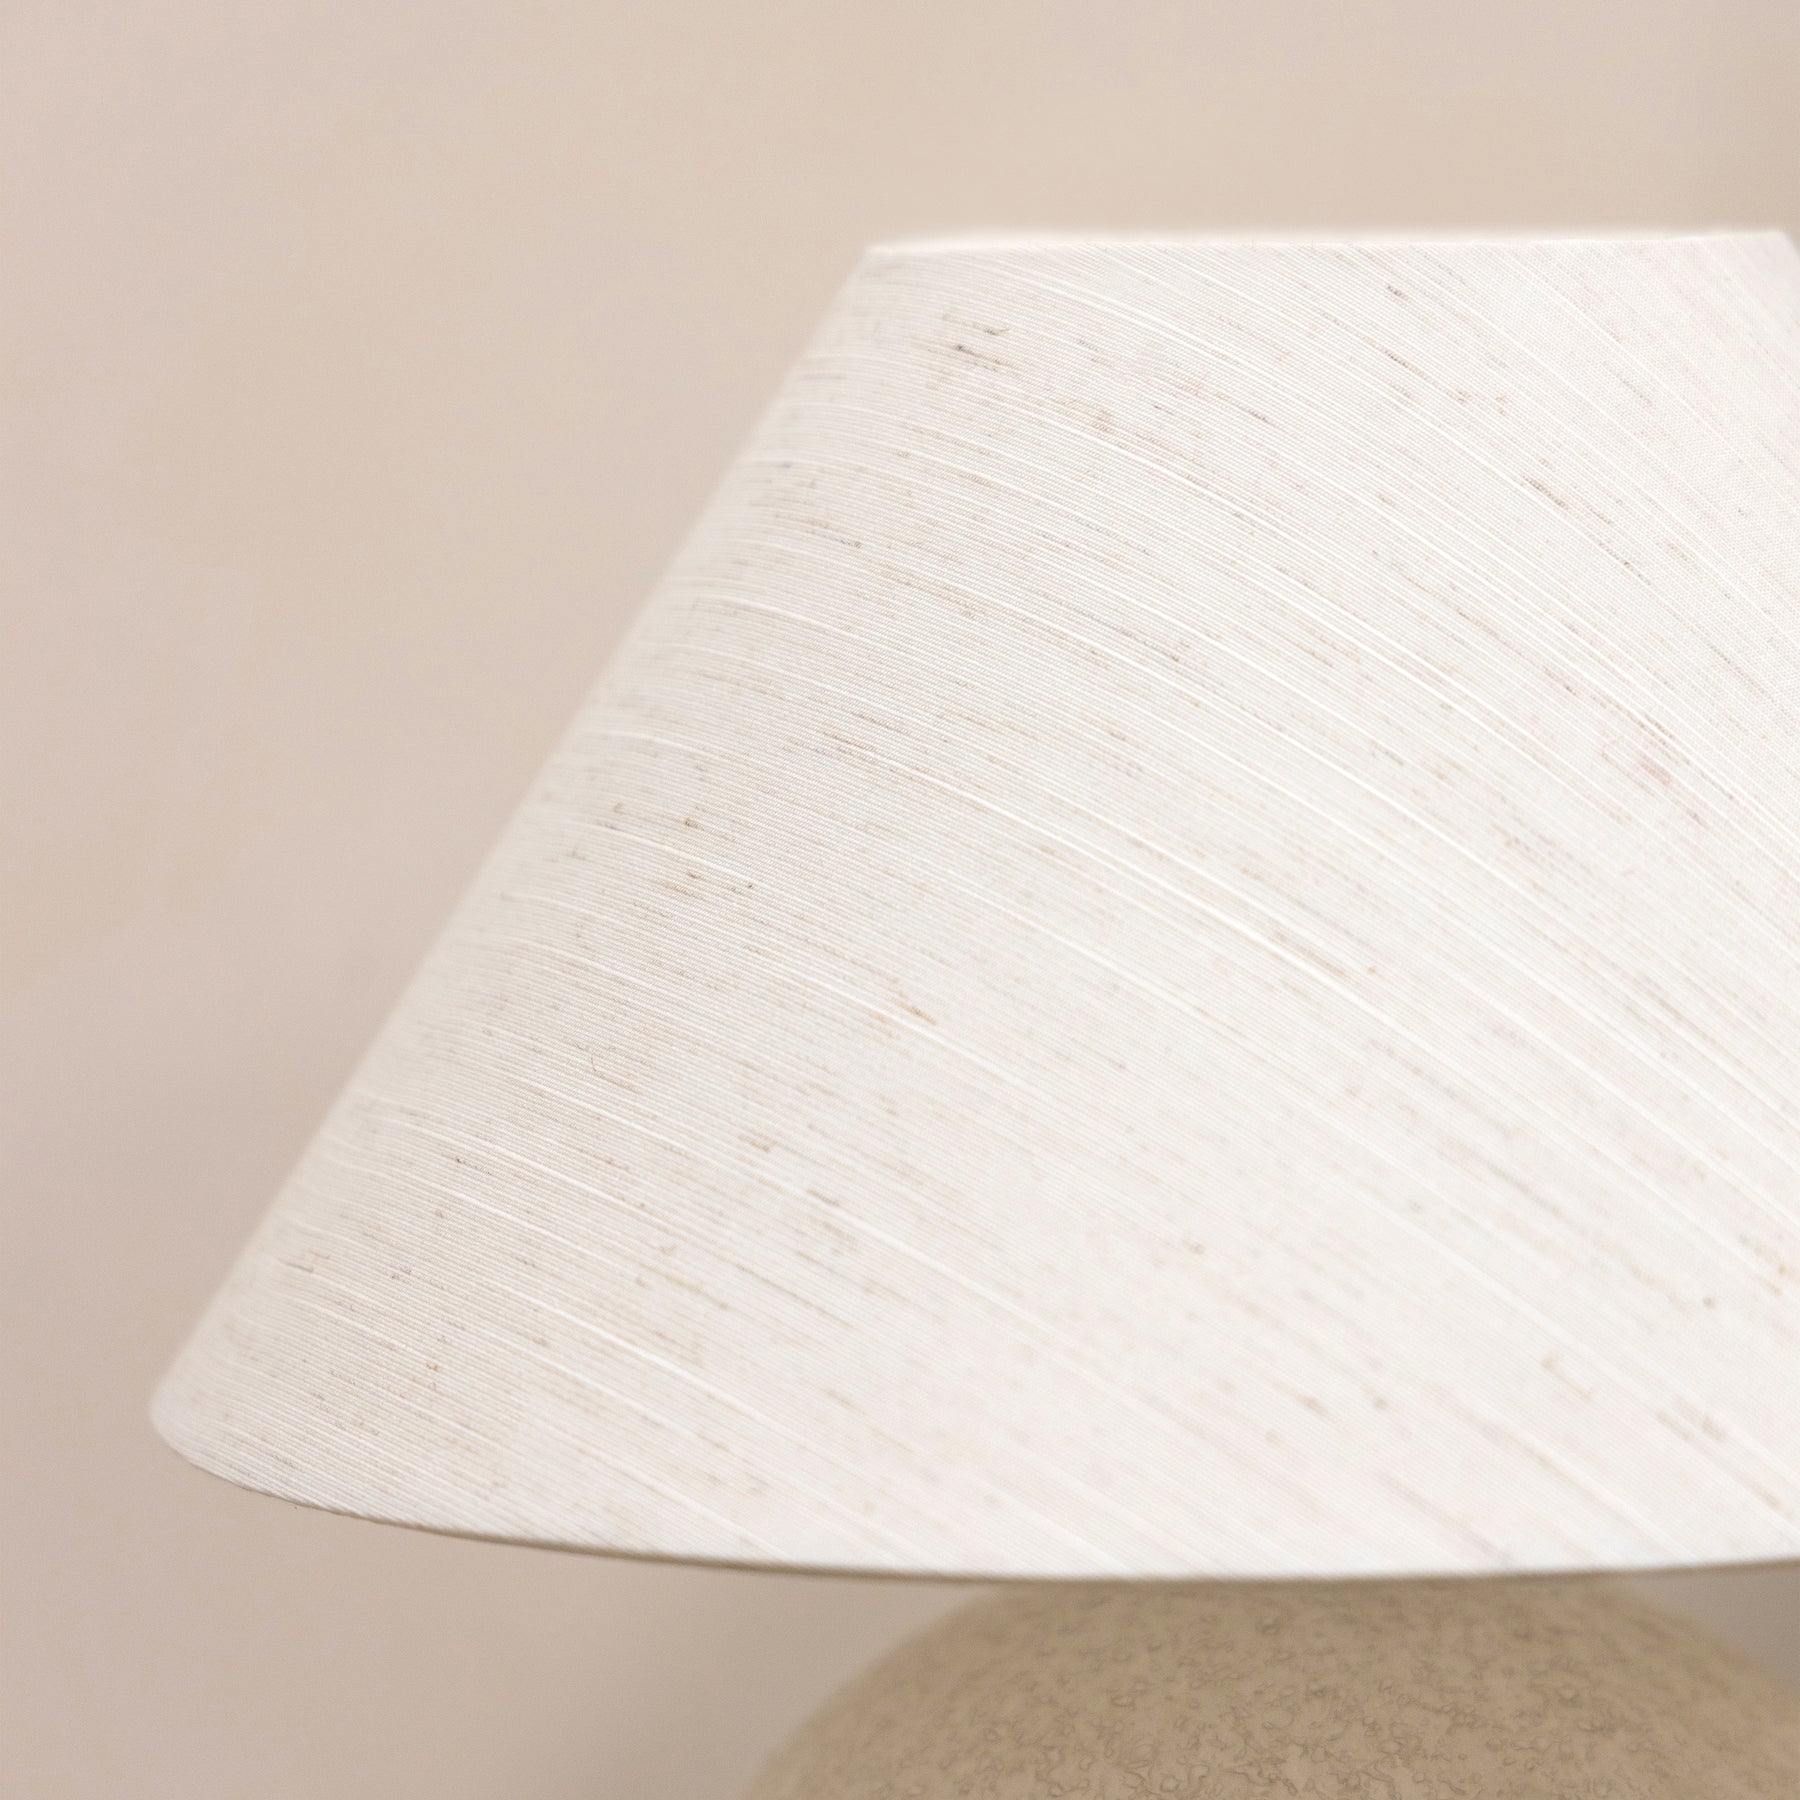 Stone ceramic coolie shade table lamp detail shot of shade